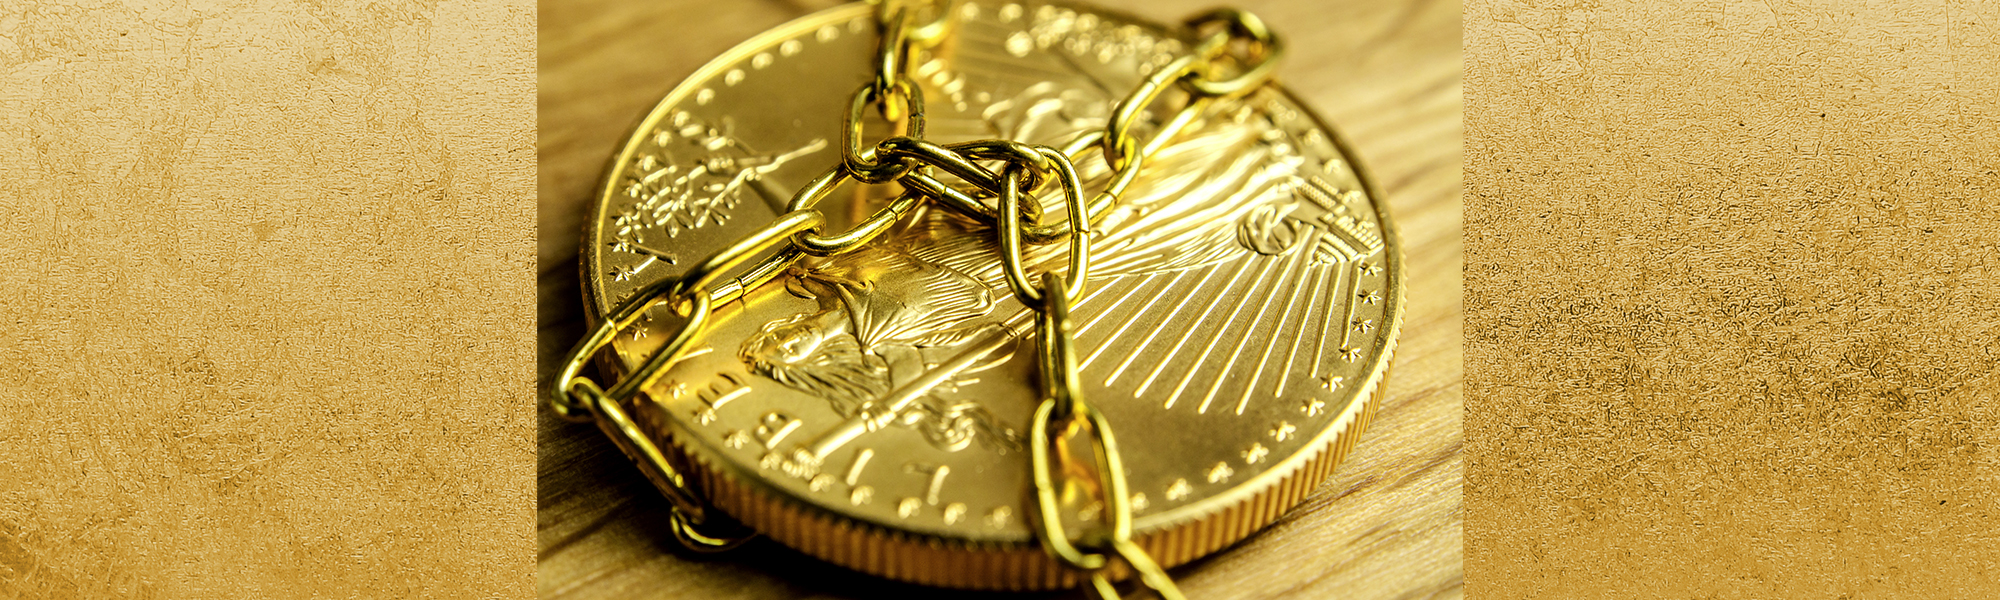 Is Gold A Good Investment? A Complete Guide On How To Invest In Gold